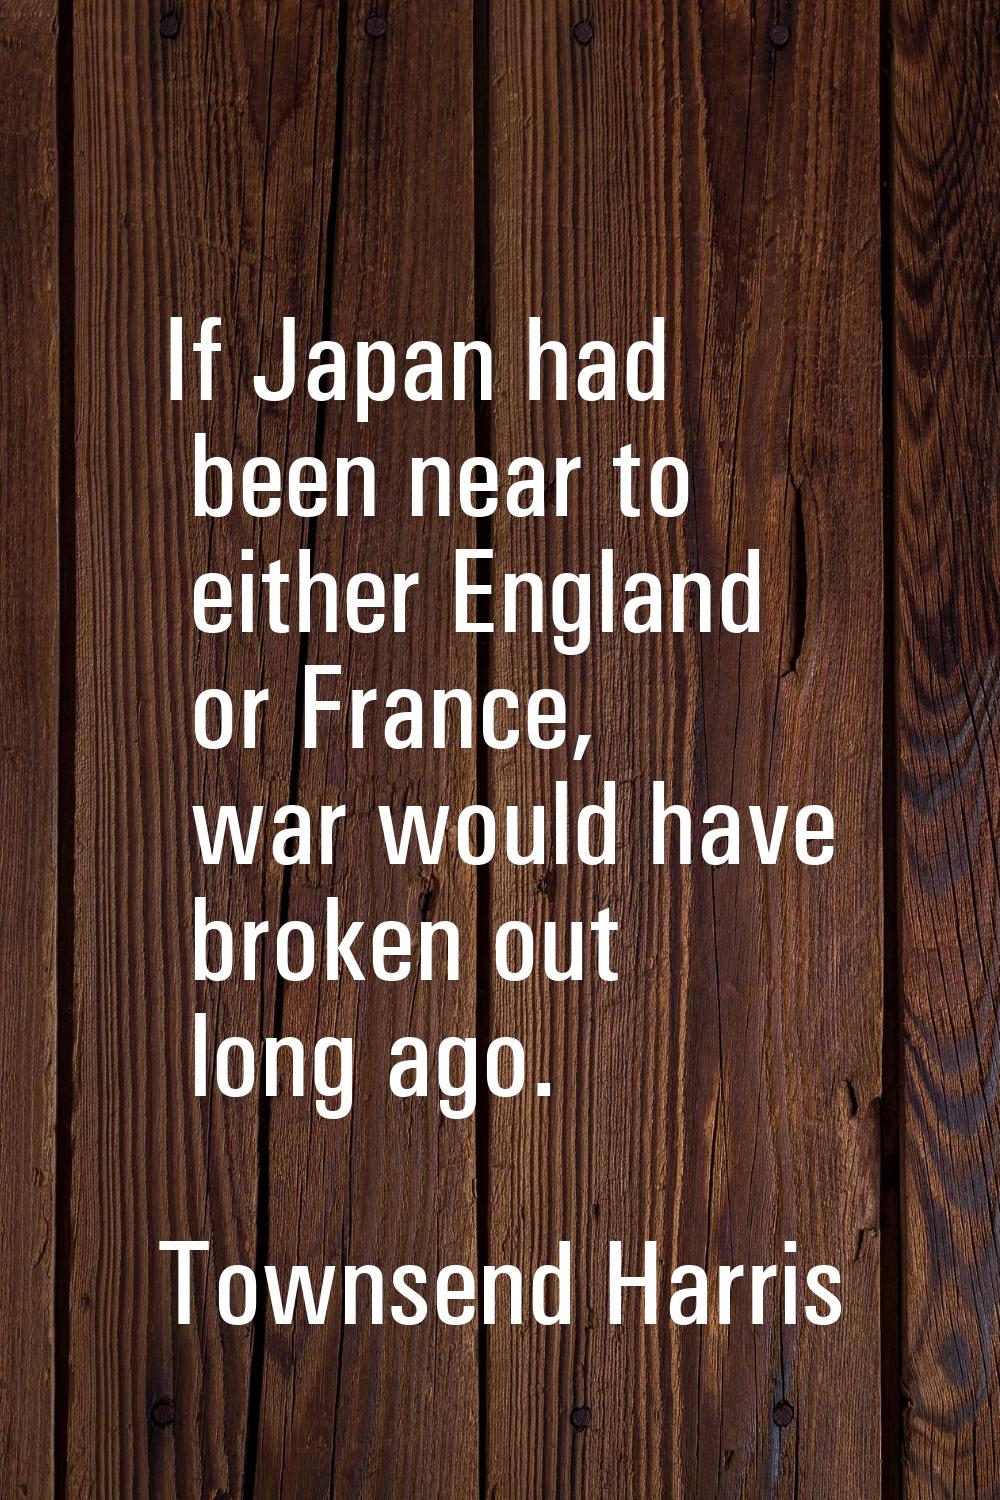 If Japan had been near to either England or France, war would have broken out long ago.